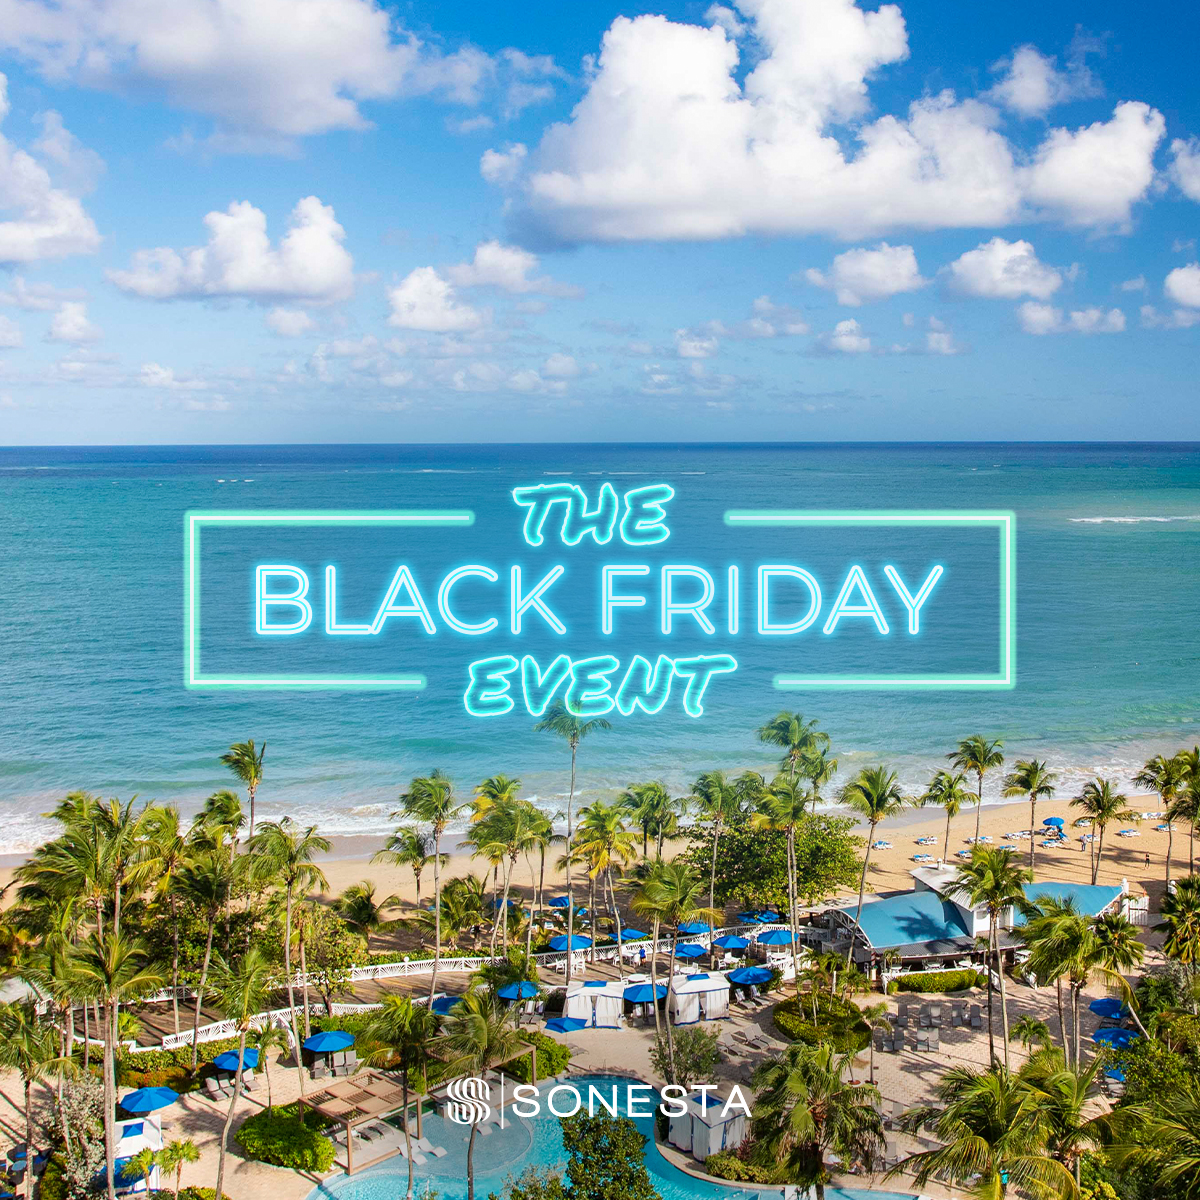 Surprise! We decided to welcome Black Friday early this year—and we’re making it last extra. Save up to 30% when you log in or enroll as a Travel Pass member. Book with code CYBER by November 30: bit.ly/3SyV6ft